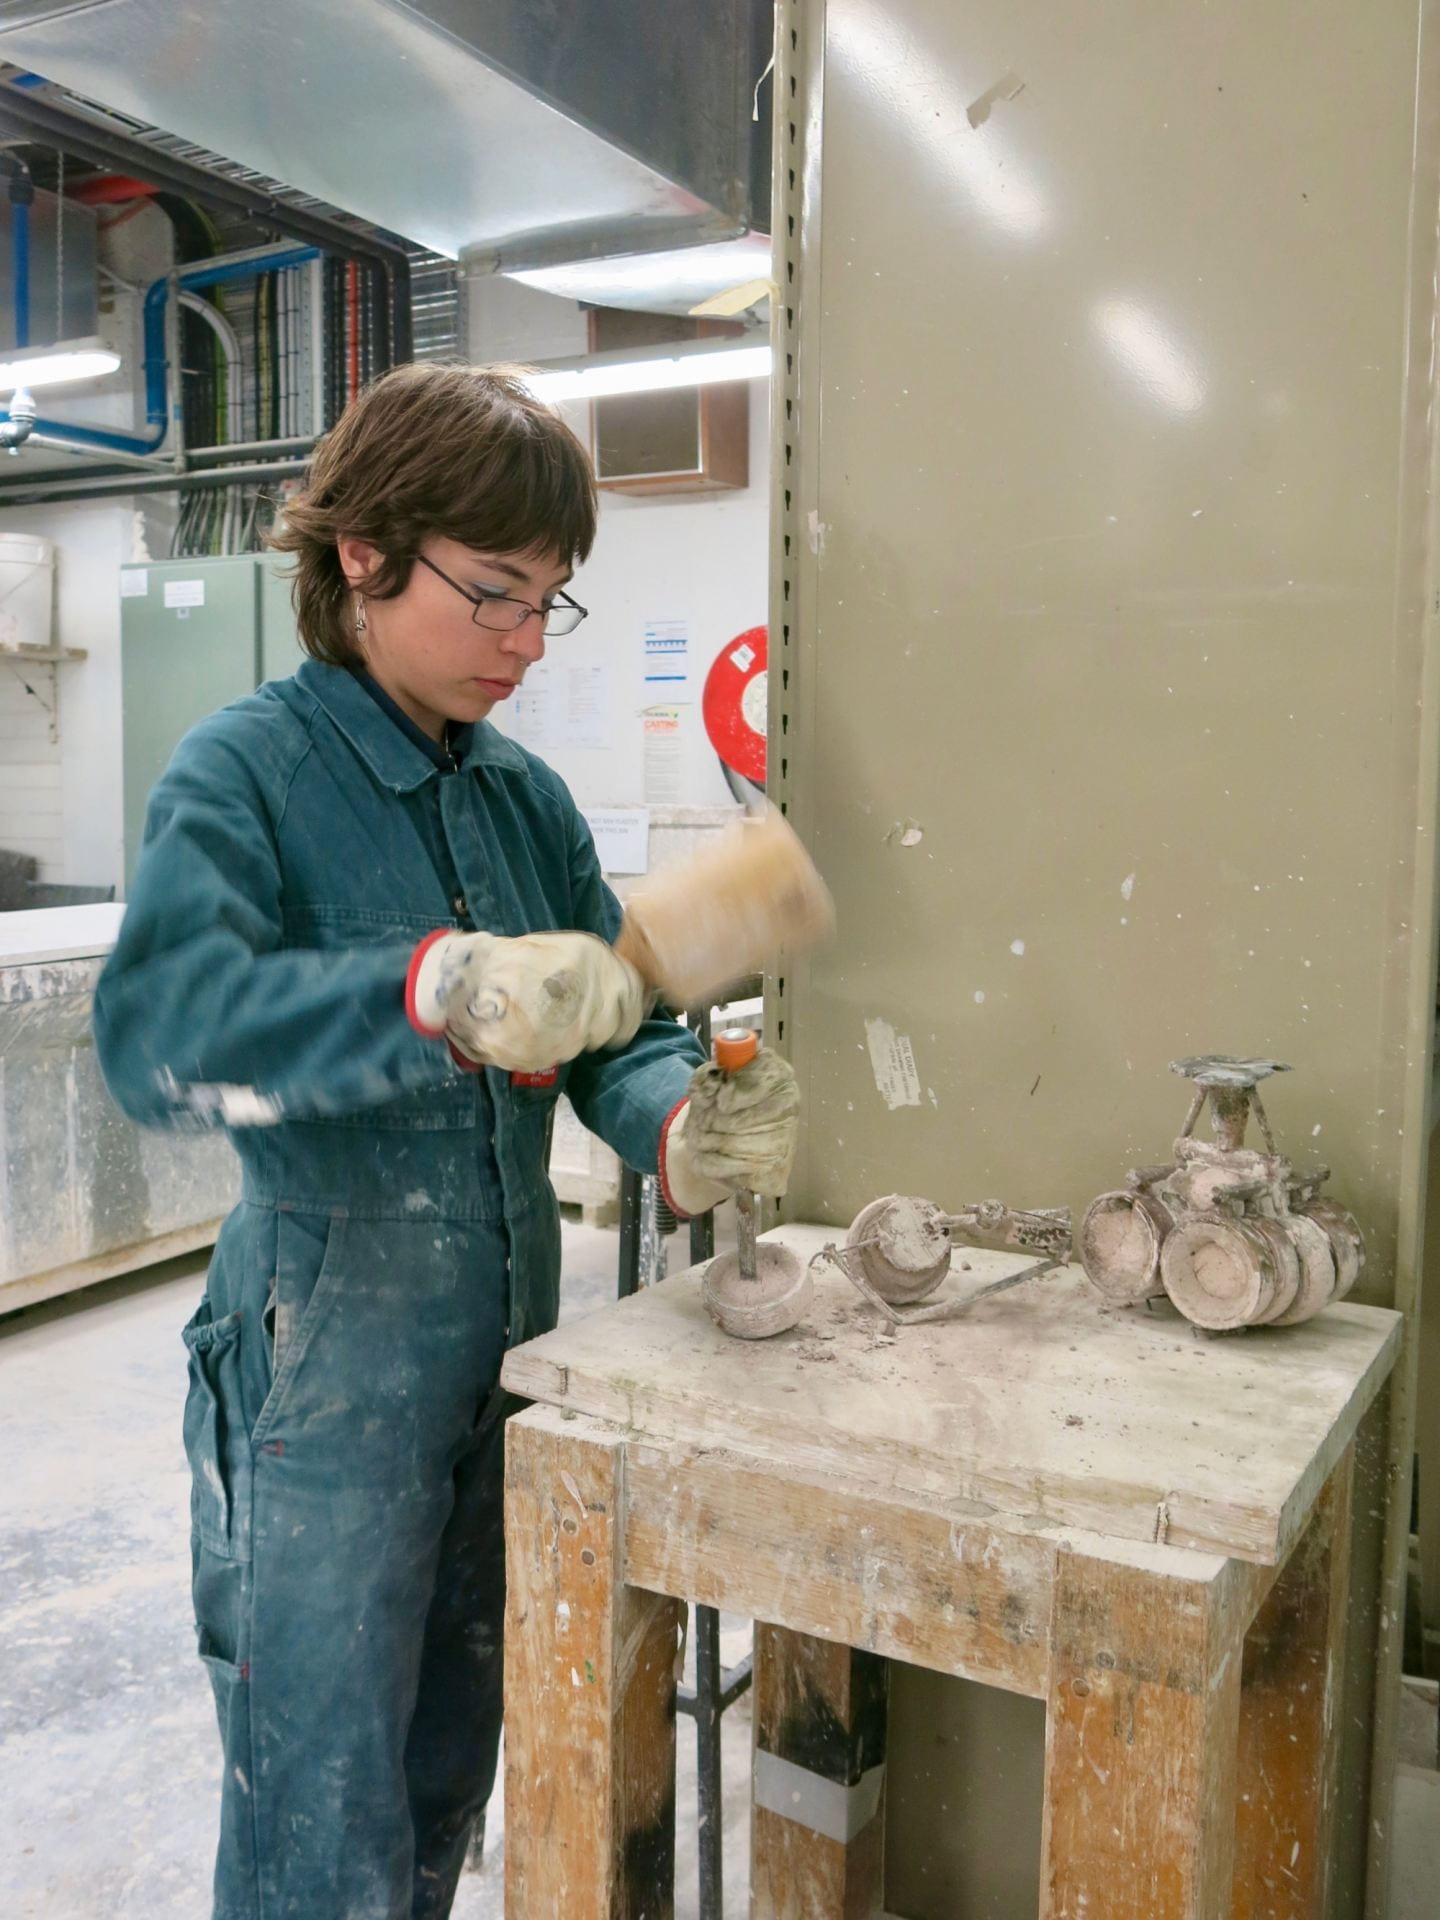 Photograph of a person removing investment from bronze using a chisel.